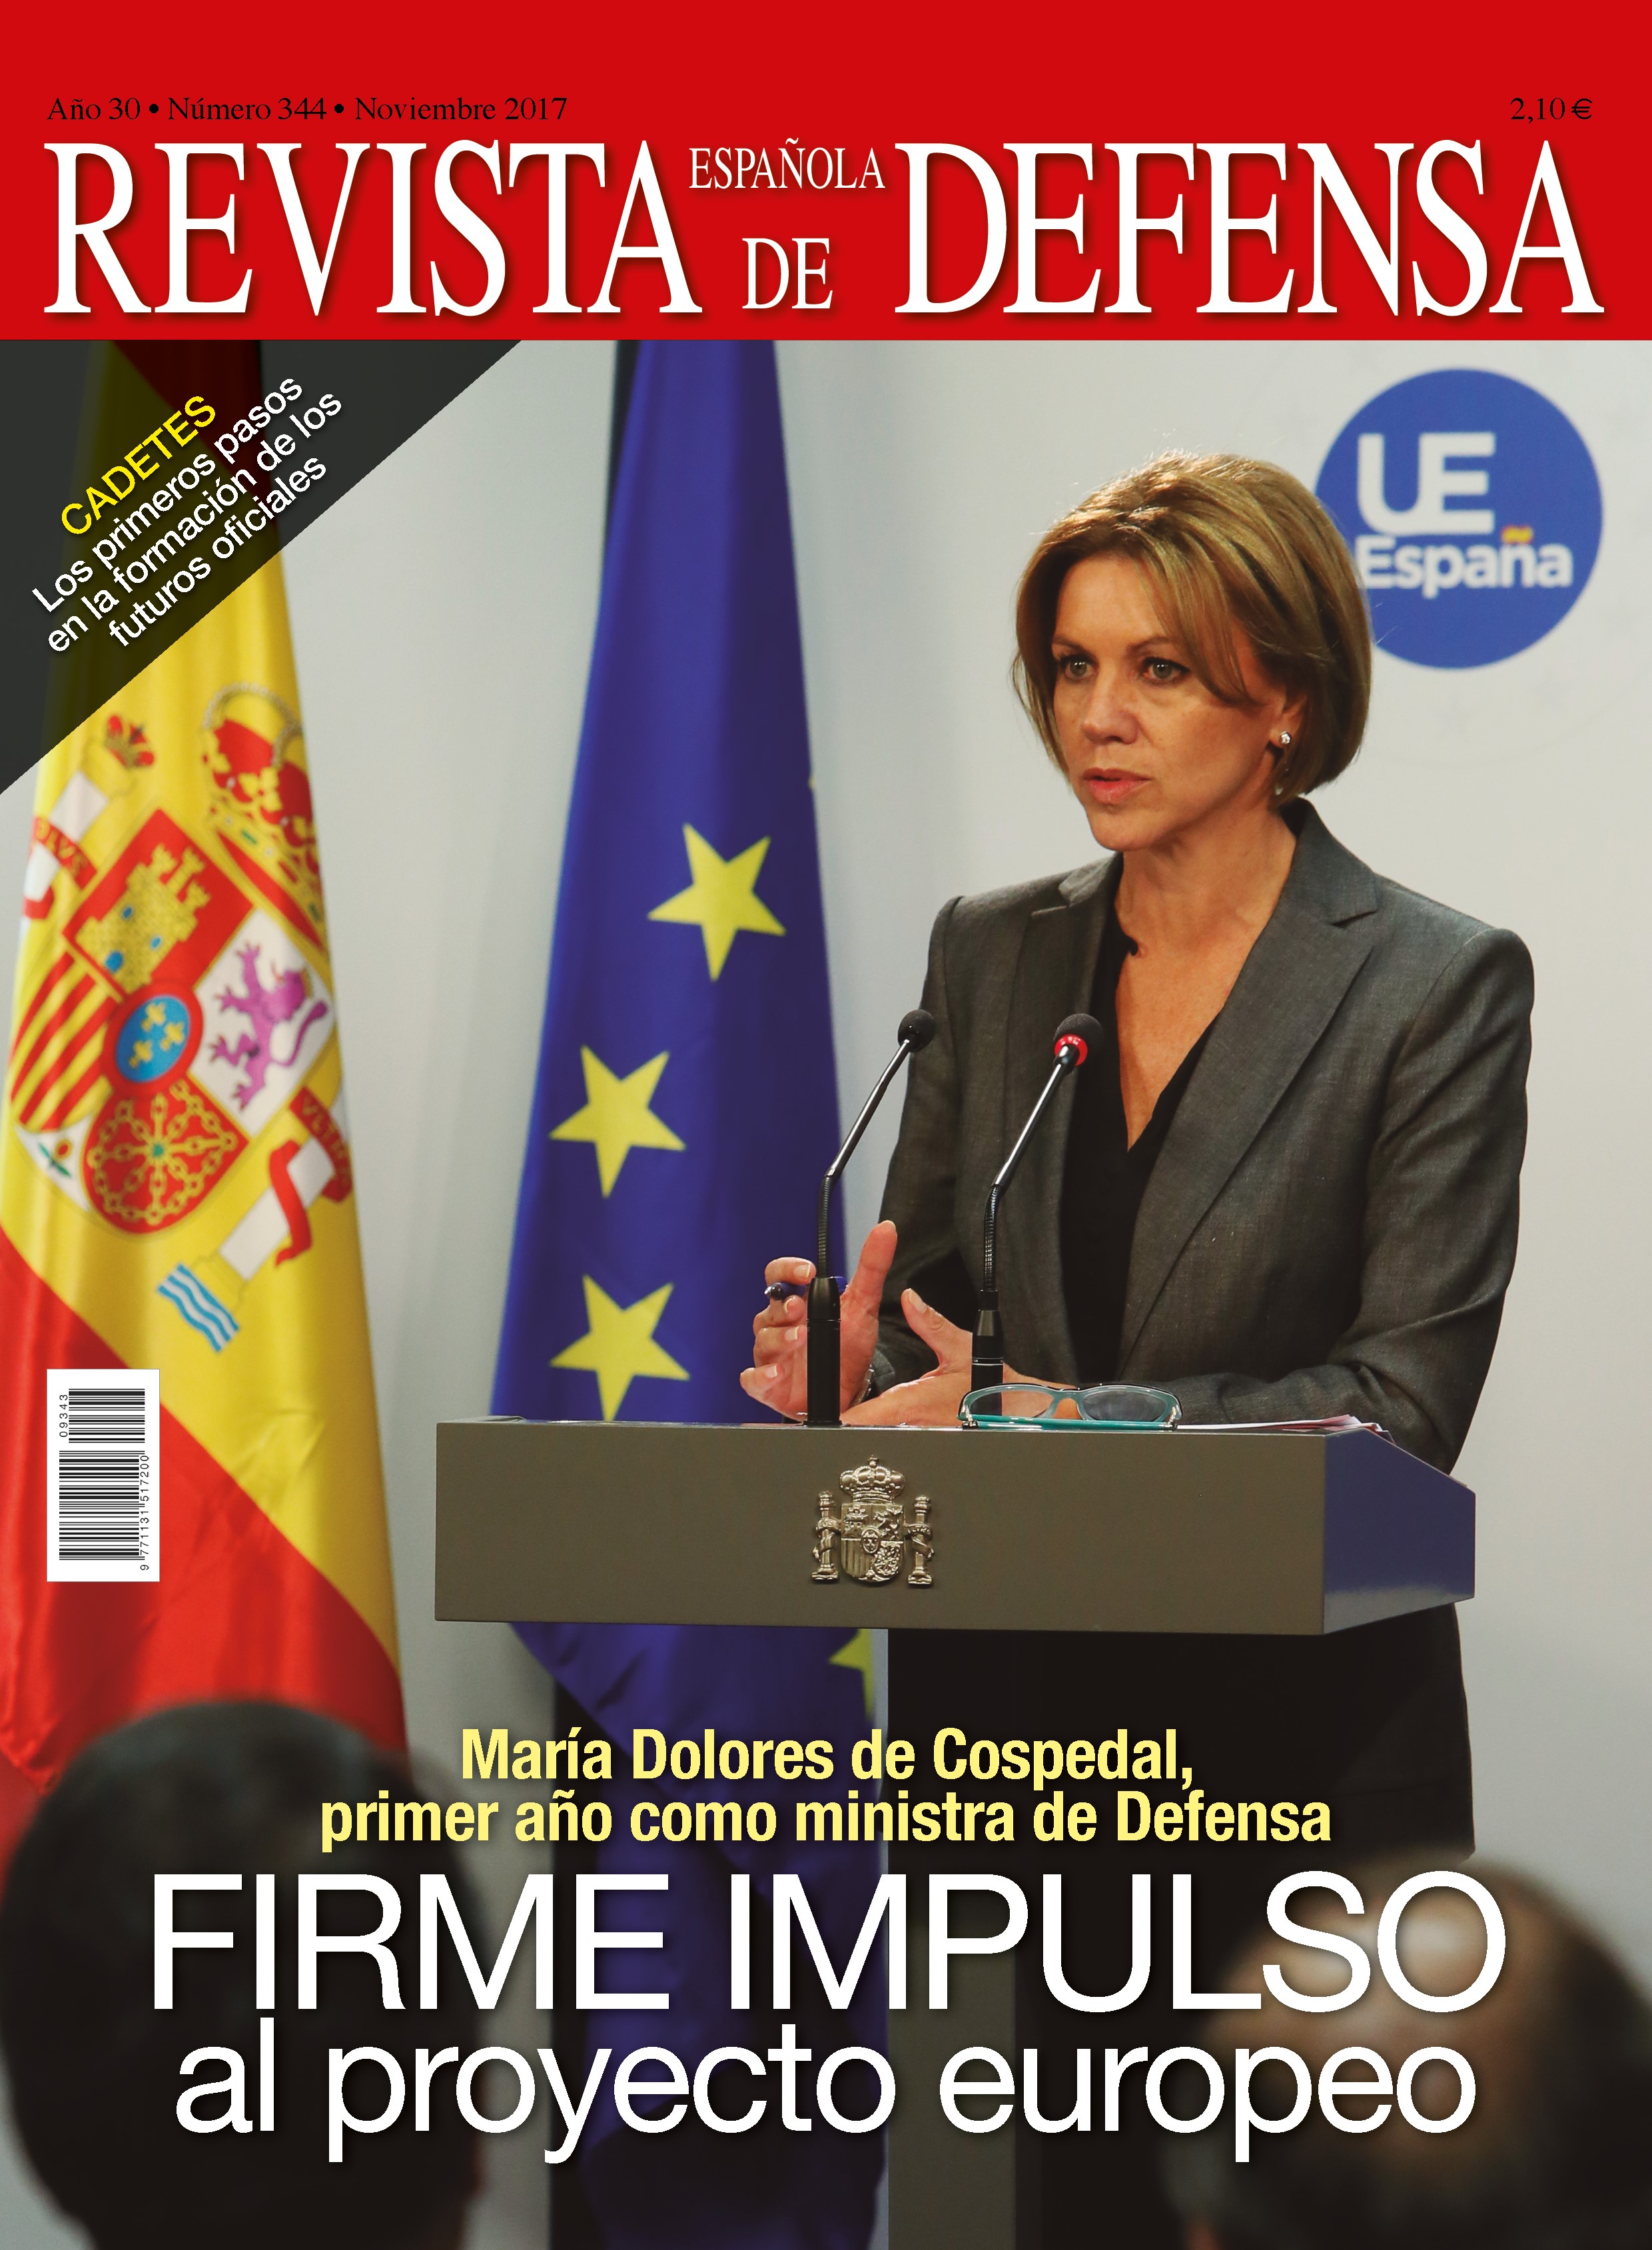 Firme impulso al proyecto europeo. RED